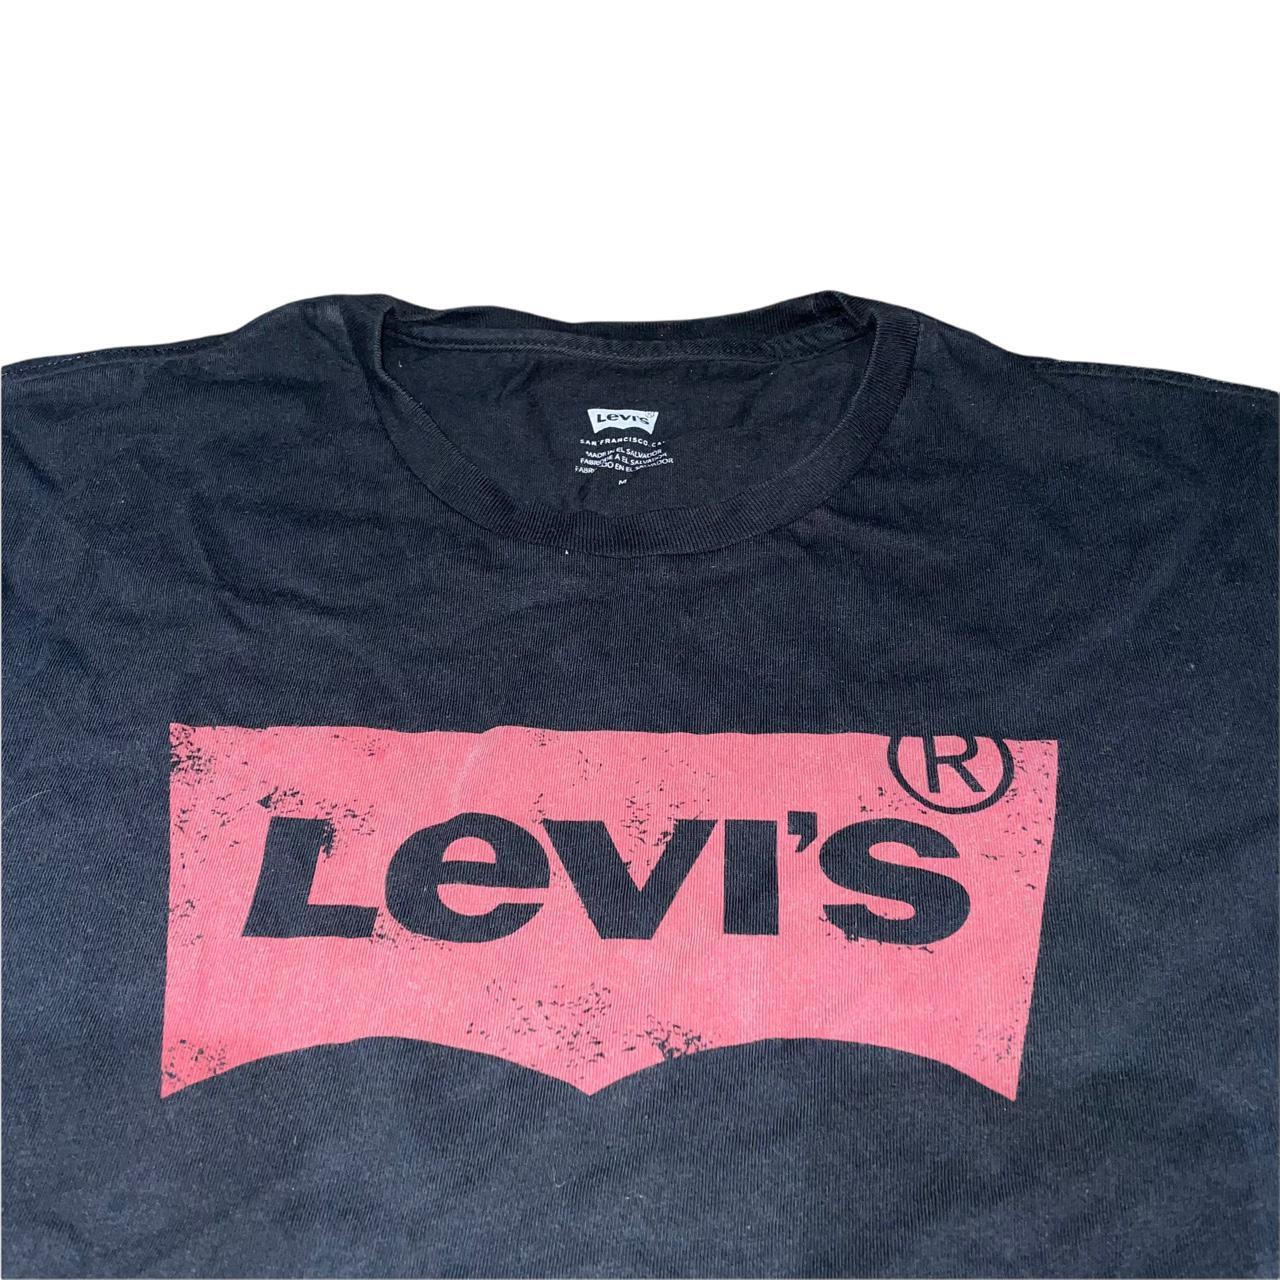 Levi's Black Red Spellout Short Sleeved T-shirt Size... - Depop